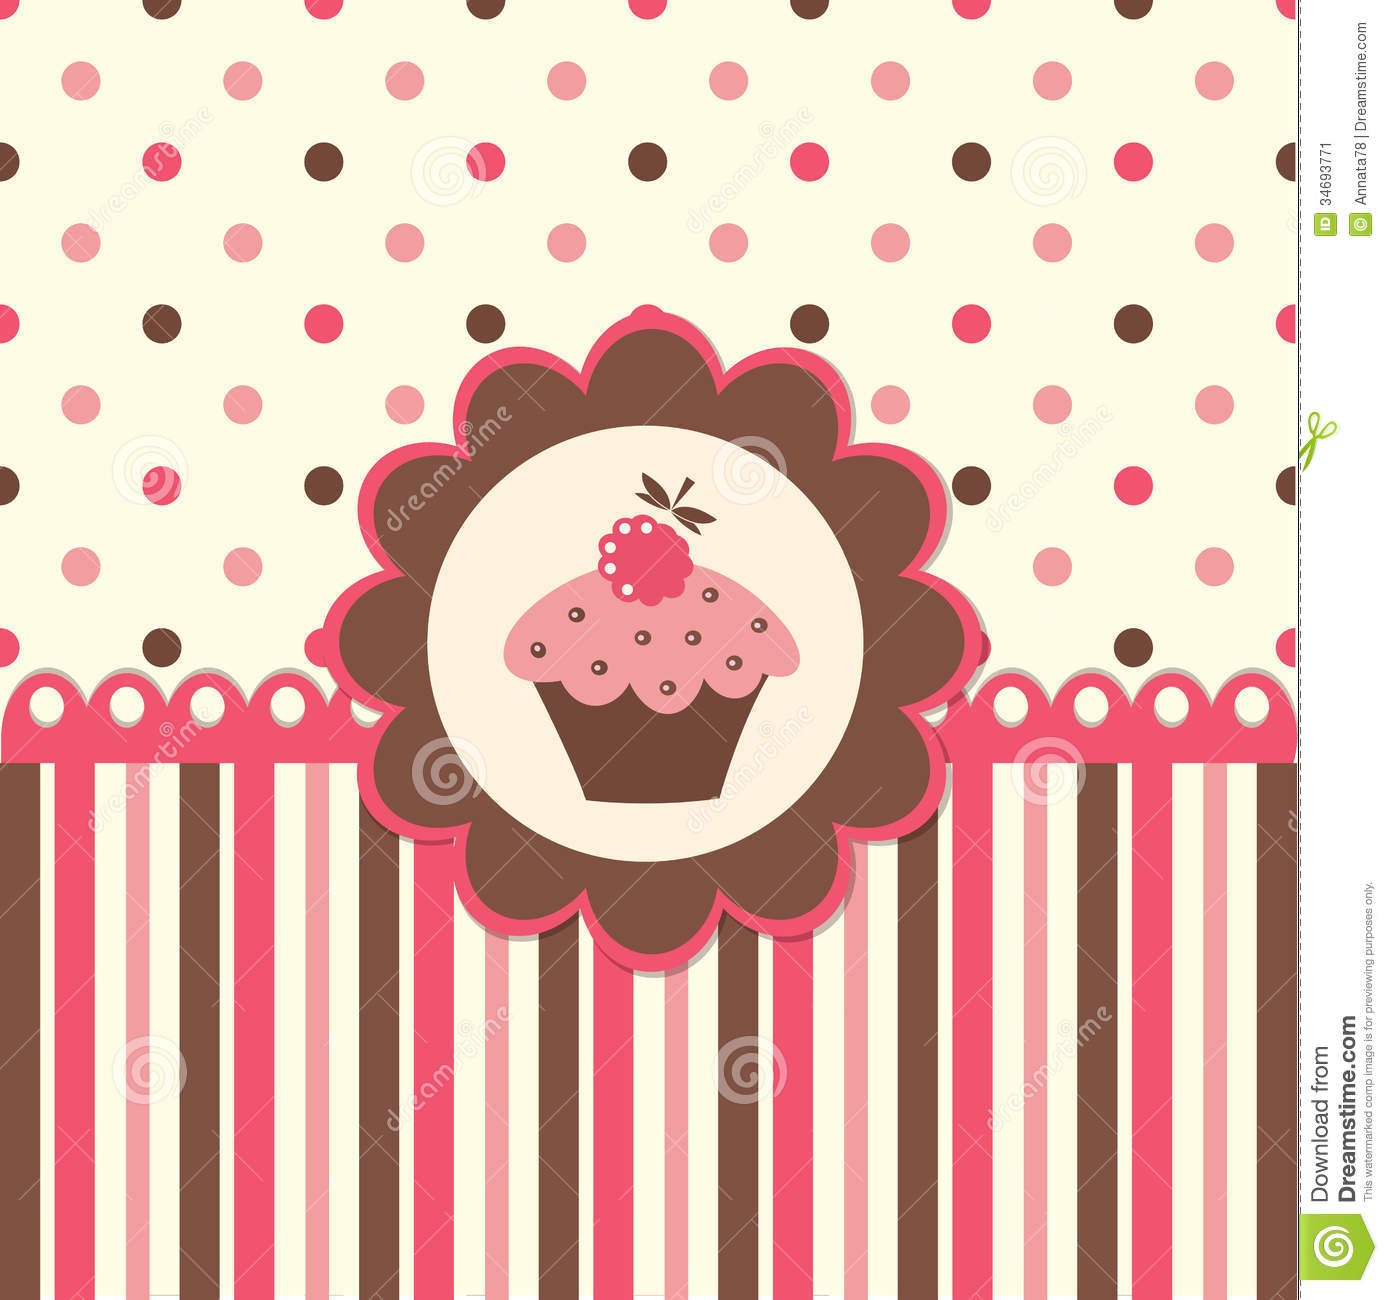 Cute Cupcake Background Vector With